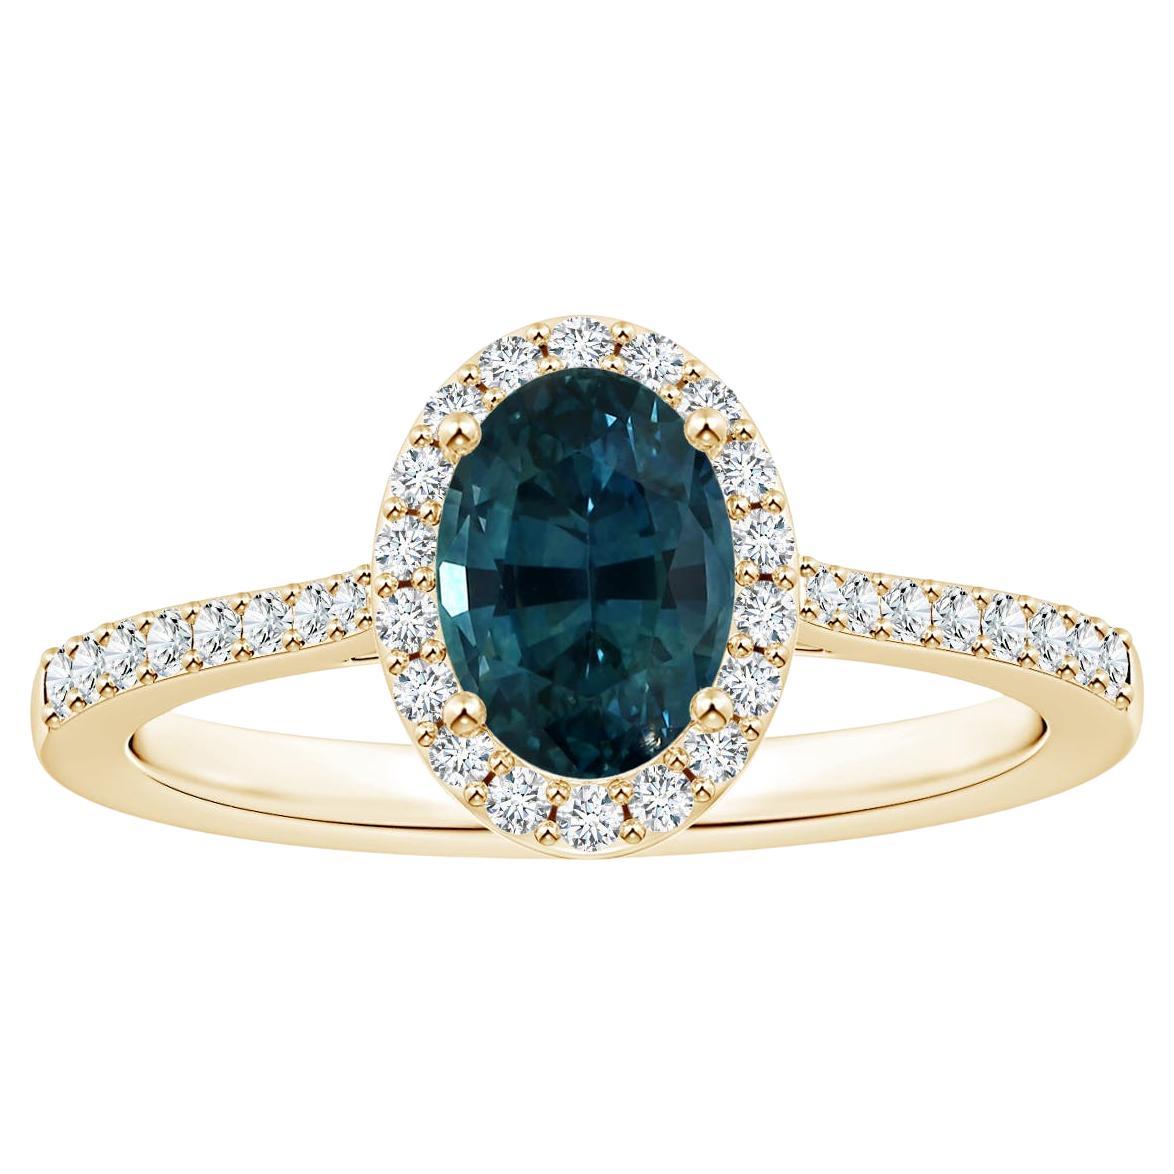 ANGARA GIA Certified Natural Teal Sapphire Ring in White Gold with Halo